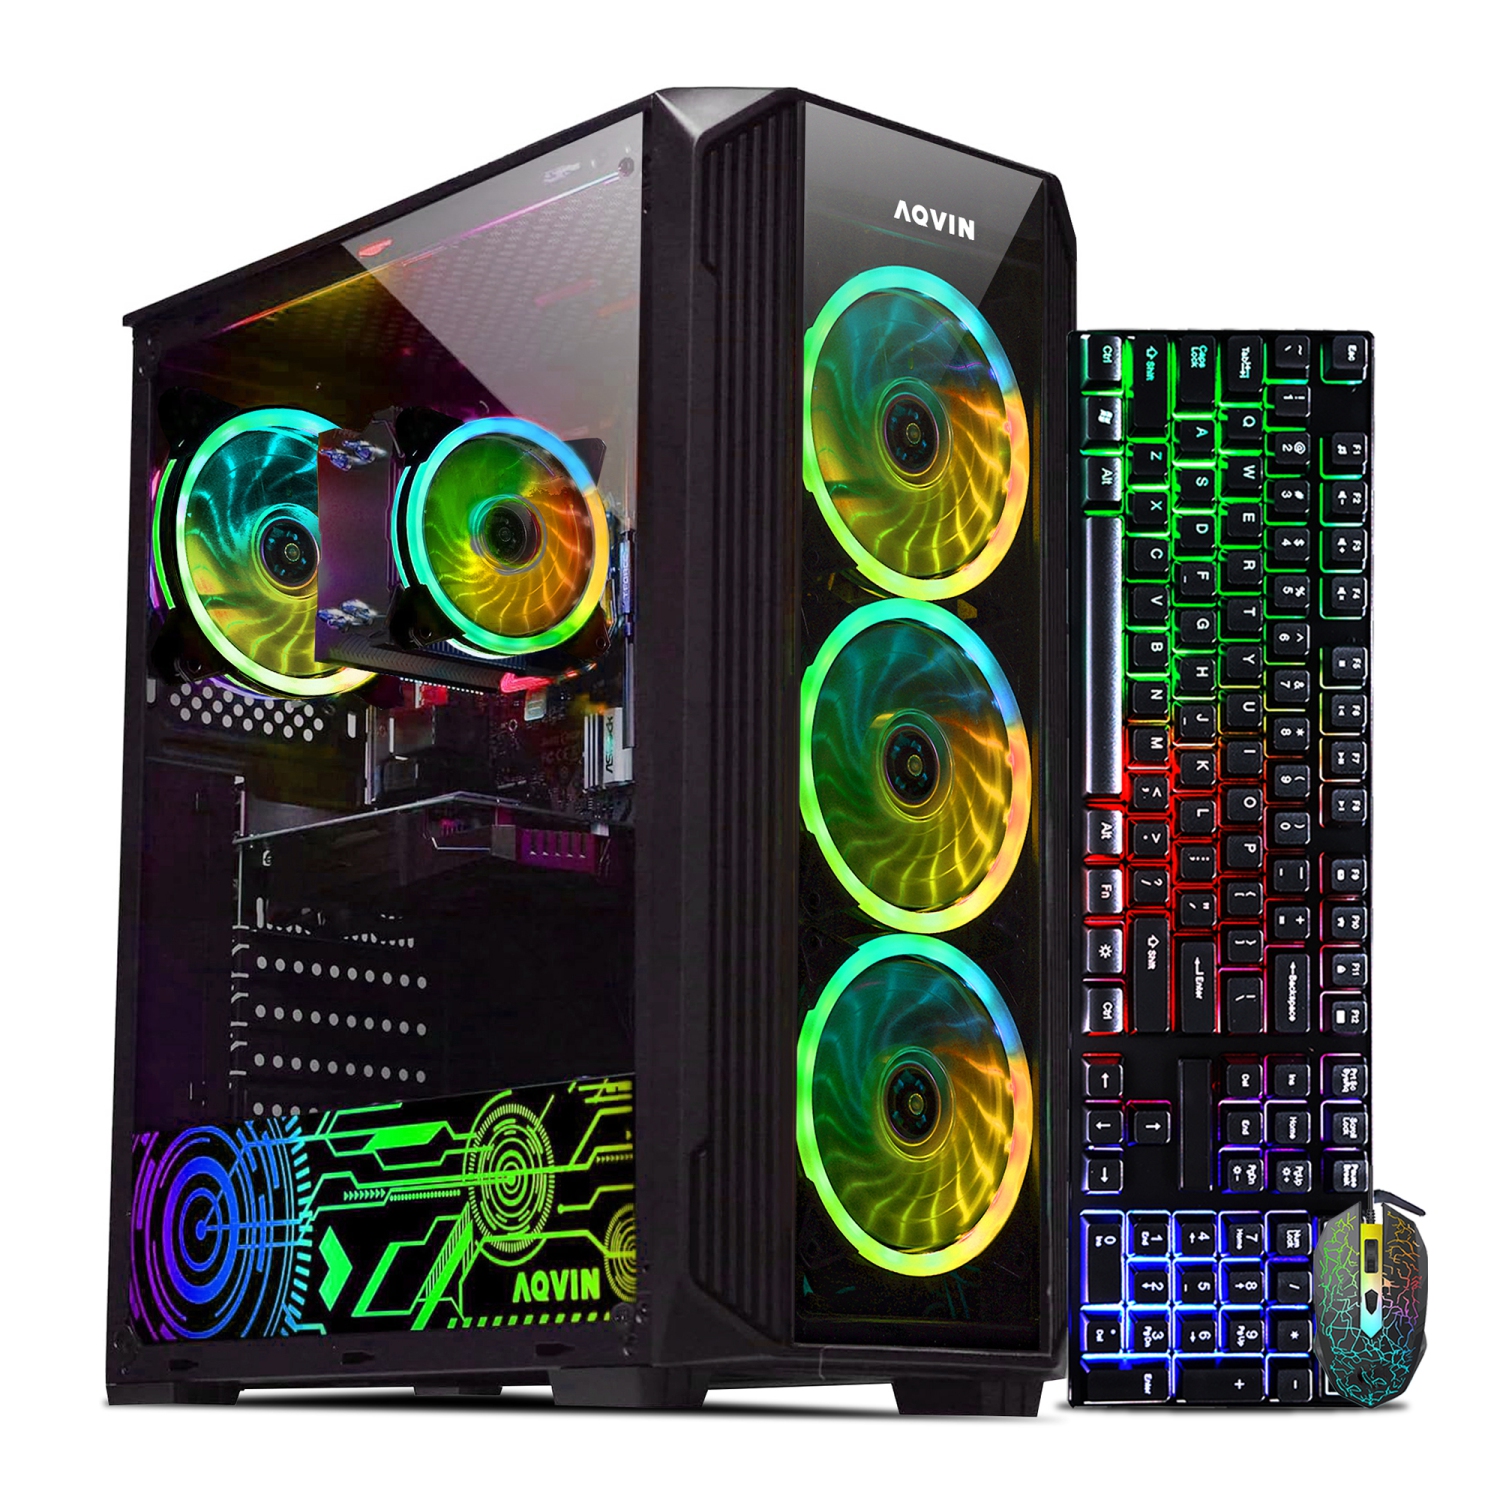 Refurbished (Excellent) Gaming PC AQVIN ZForce Tower (Core i7/ GeForce RTX 3060 12GB/ 1TB SSD(fast boost) + 2TB HDD/ 32GB DDR4 RAM/ WIN 10 Pro) Desktop Computer - Only at Bestbuy